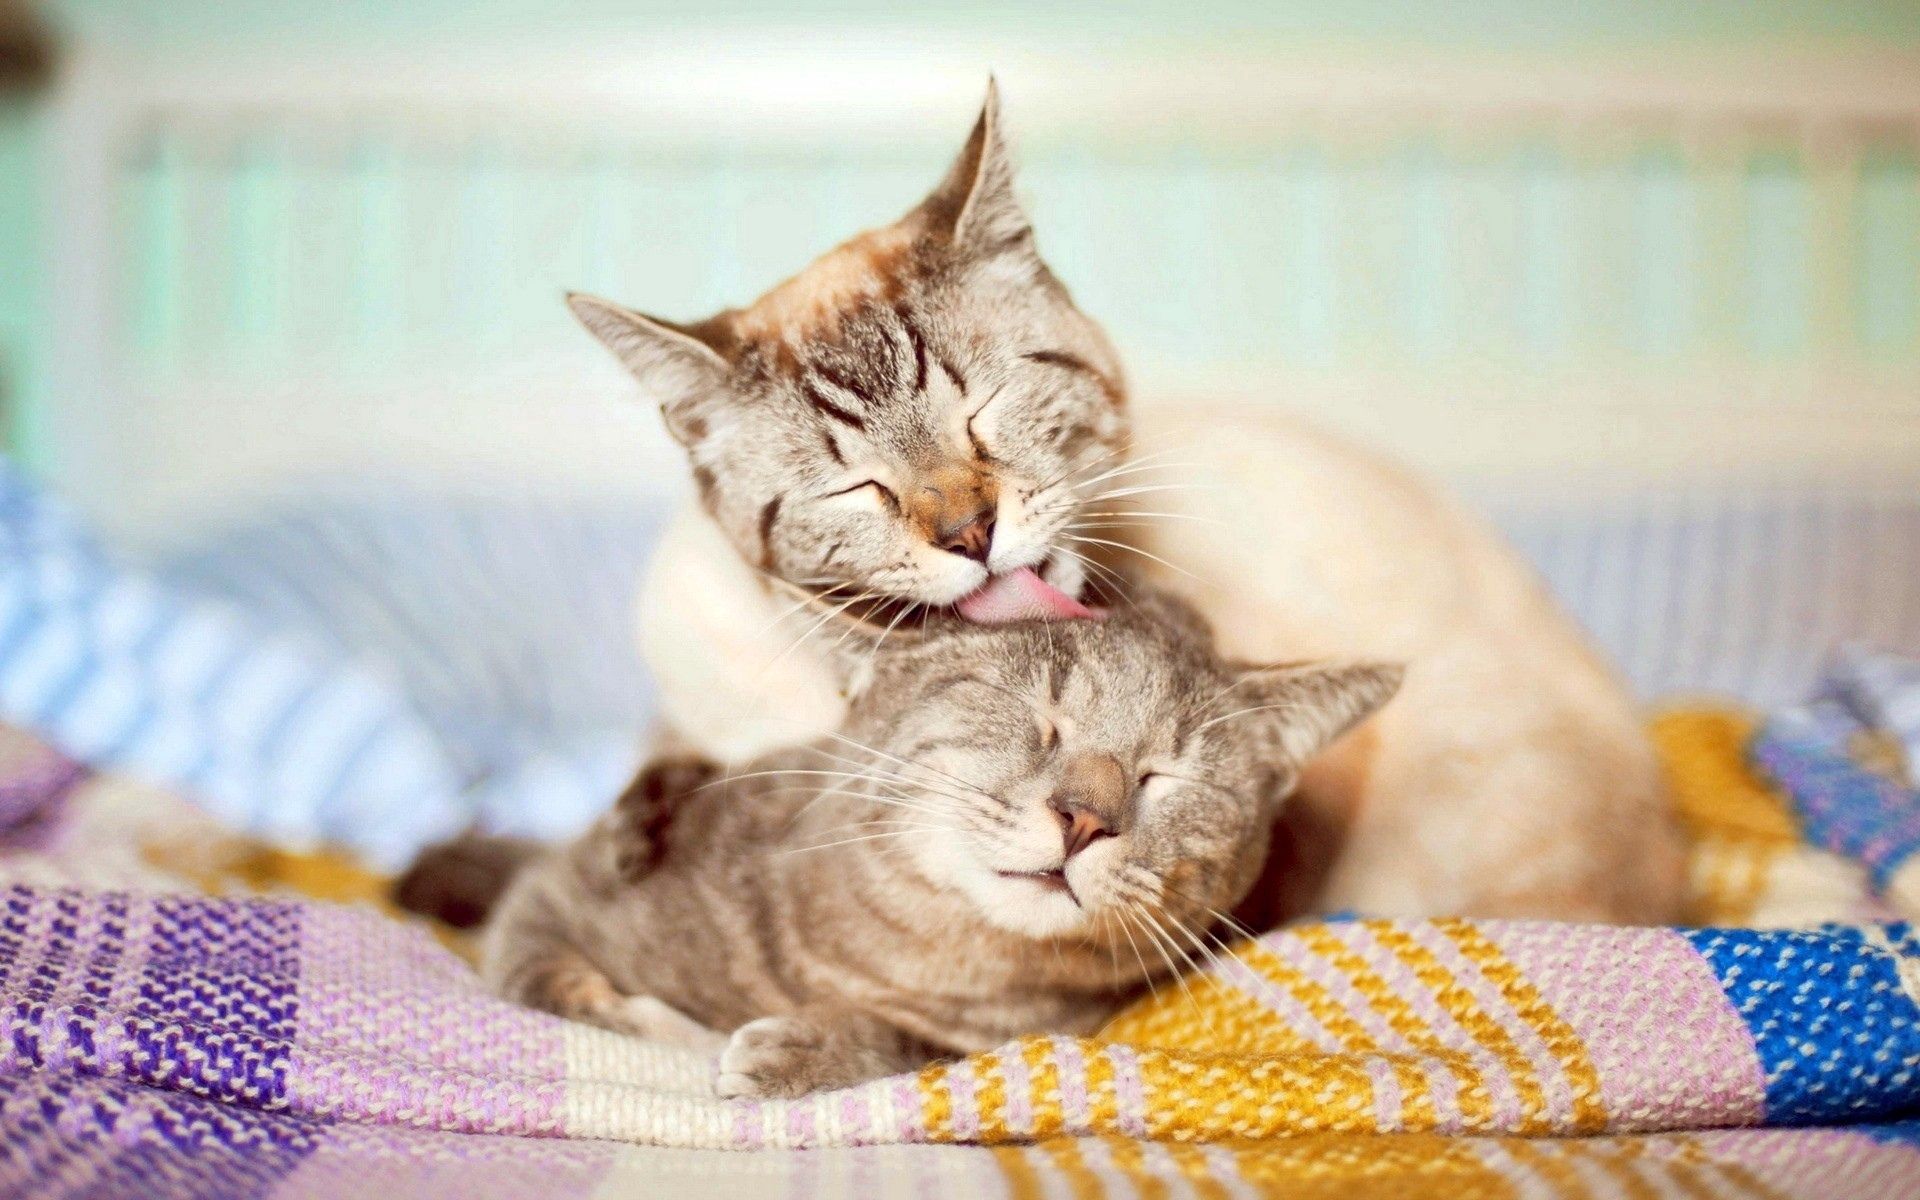 tenderness, cats, animals, couple, pair, care